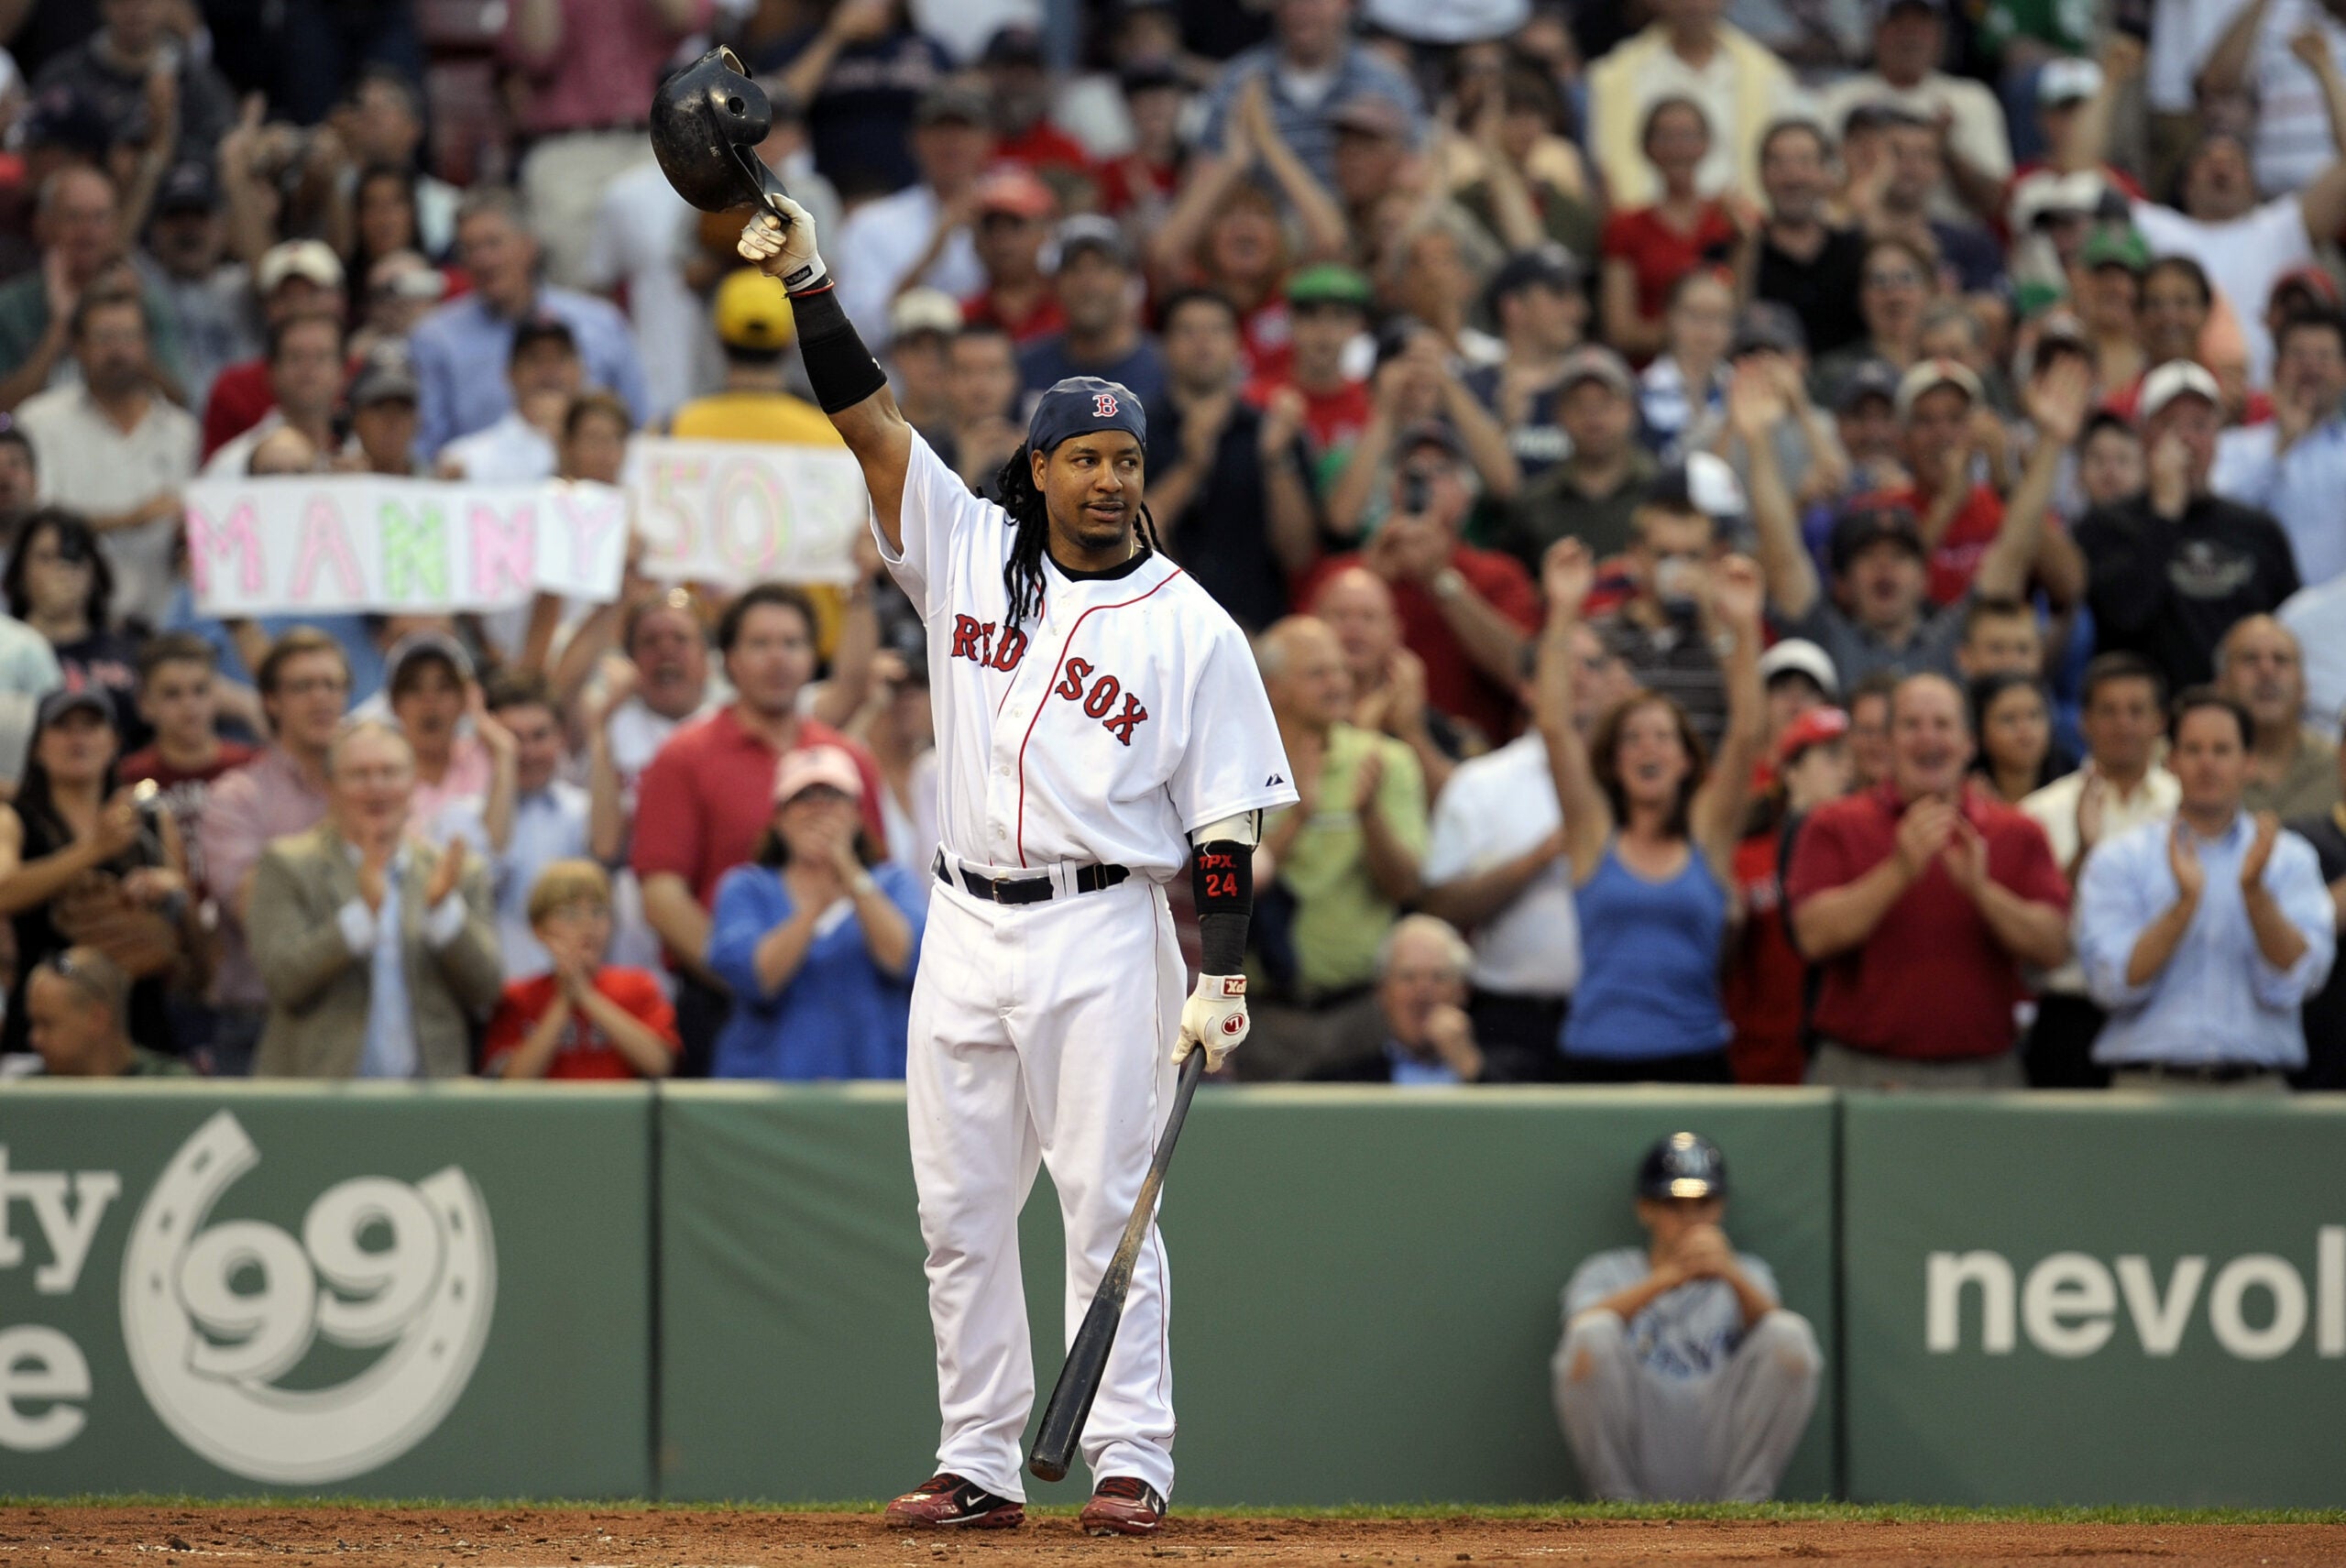 Manny Ramirez was an all-time great hitter, but where exactly does he rank?